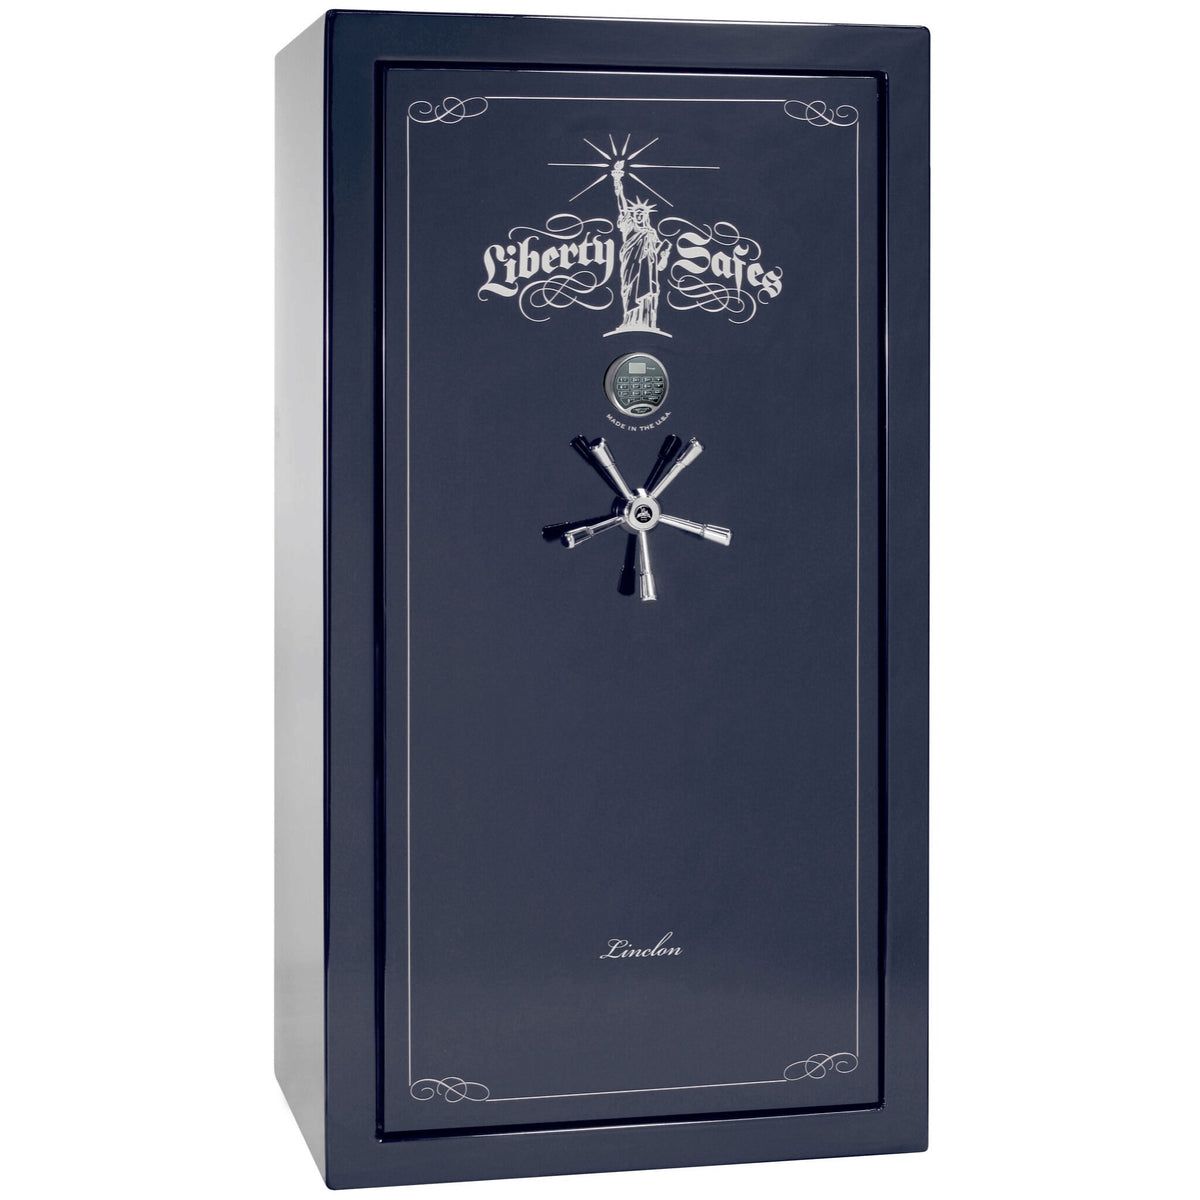 Liberty Lincoln 40 Safe in Blue Gloss with Chrome Electronic Lock.